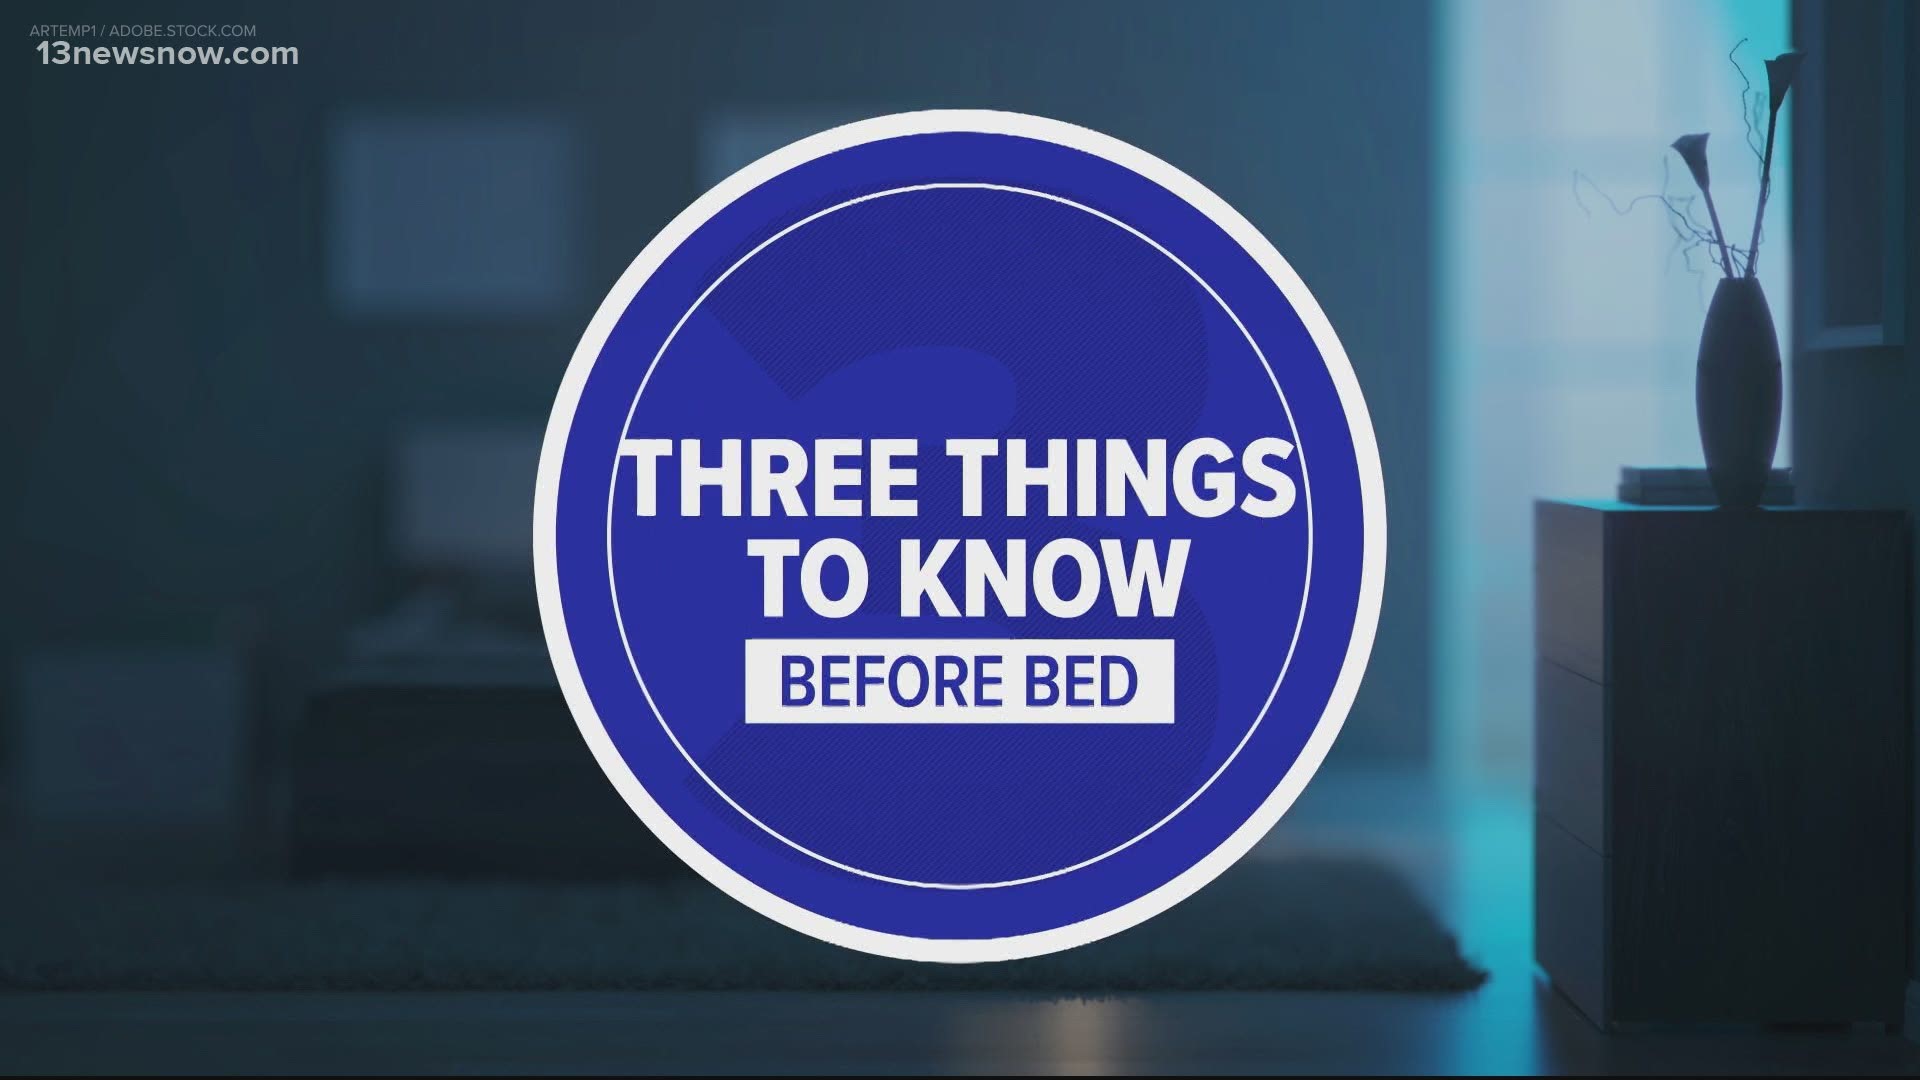 Brian Farrell is here with three things to know before bed.